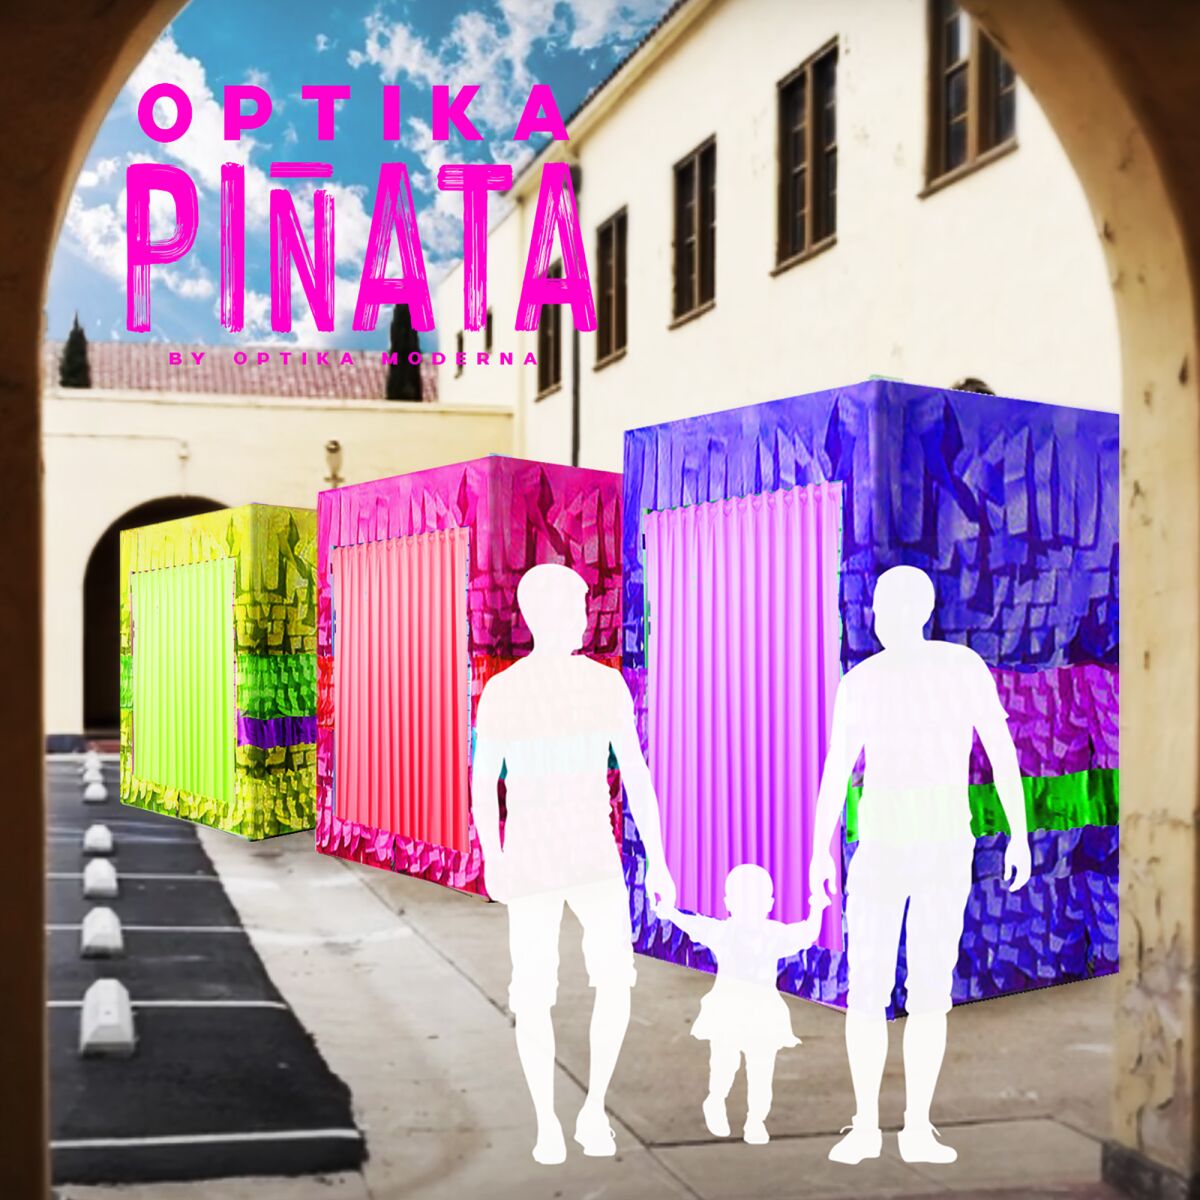 "Optika Piñata" will take place Aug. 14-15 at Liberty Station in Point Loma as part of La Jolla Playhouse's Pop-Up WOW fest.